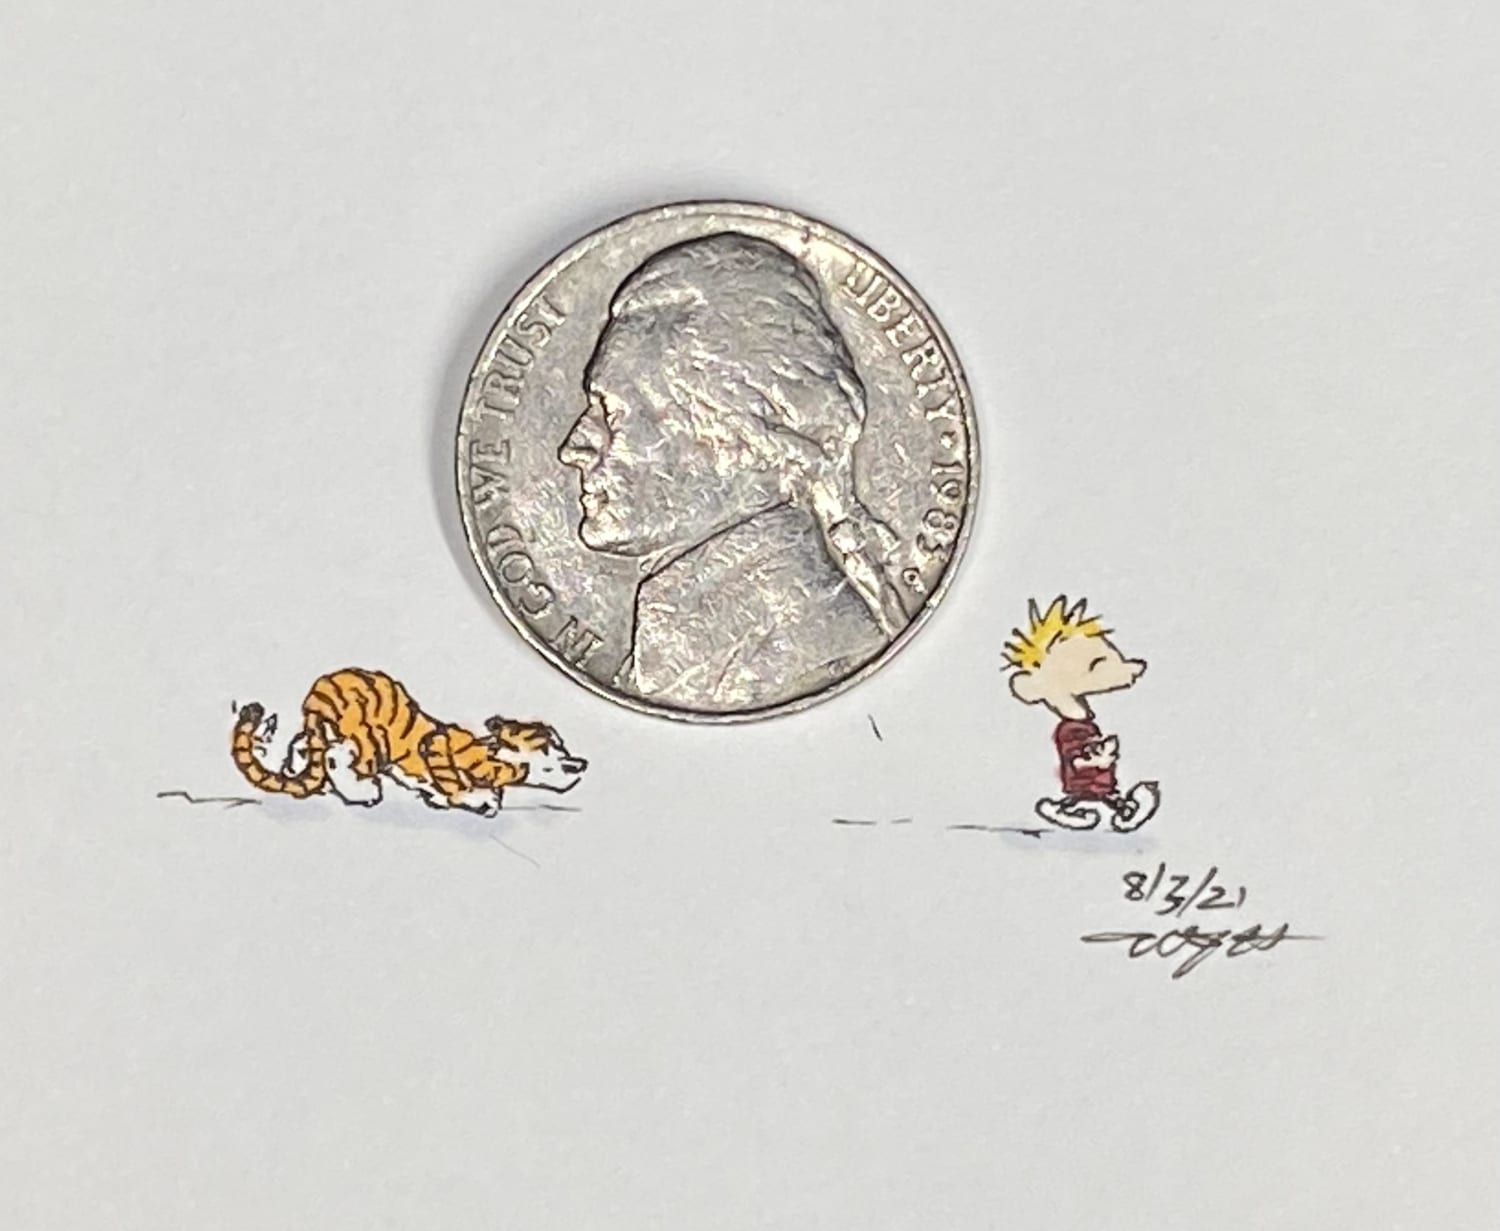 Micro Drawing - Hobbes Stalking Calvin. Click on the link in the comments to see me actually drawing this picture.